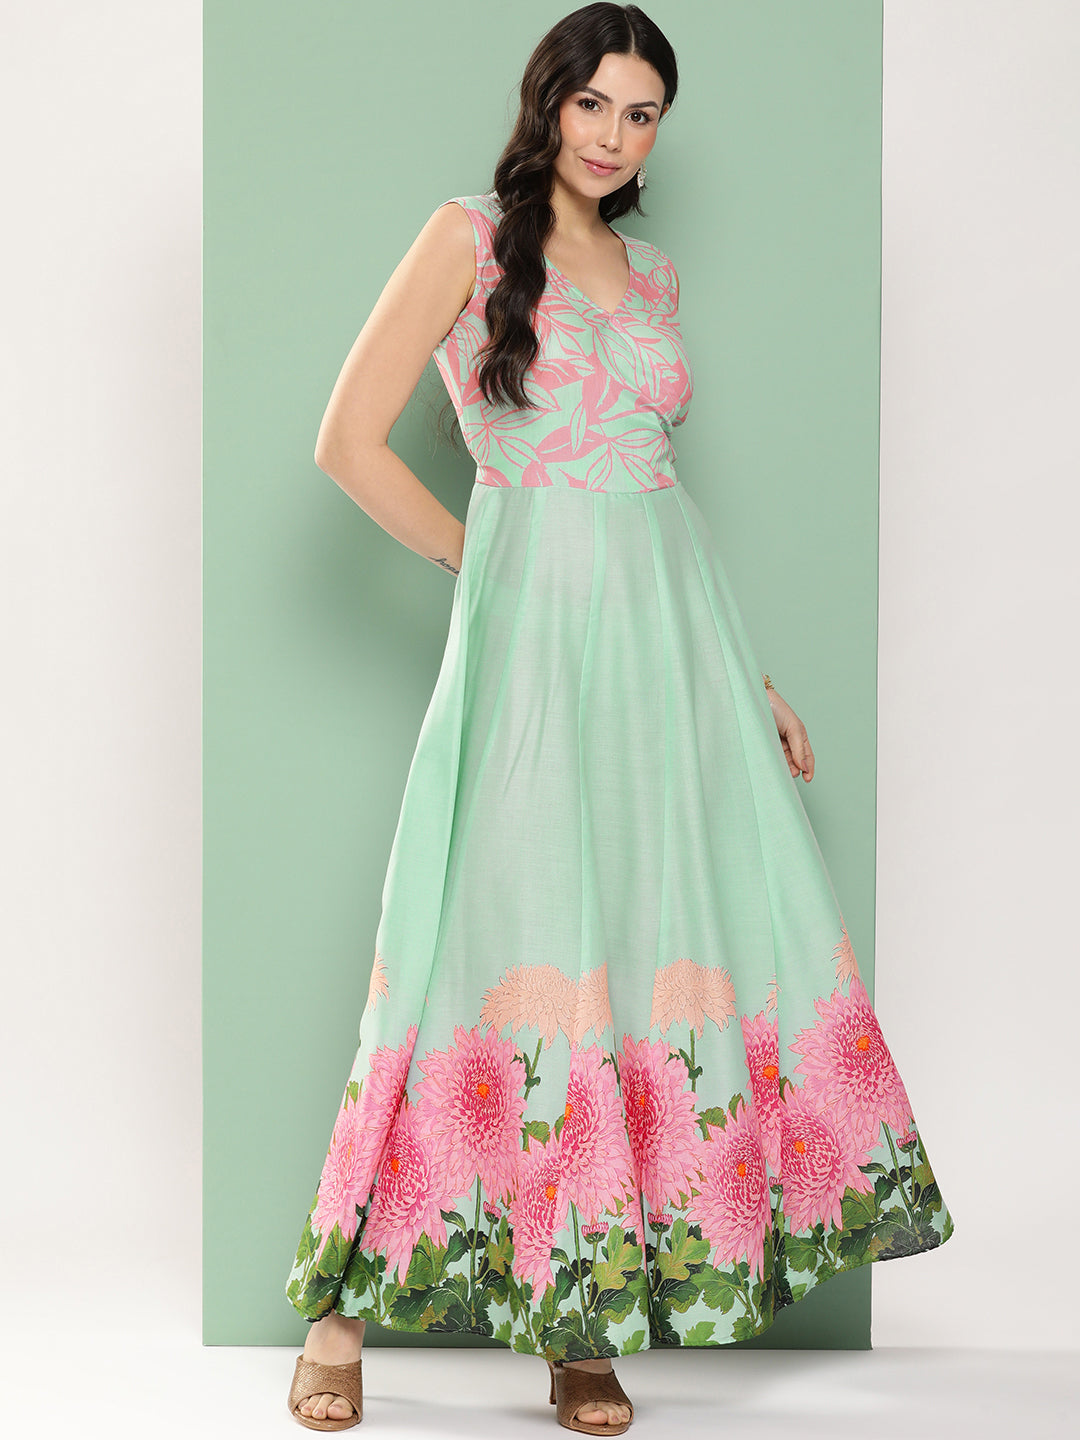 Women's Turquoise Blue Printed Long Dress With V-Neck - Bhama Couture